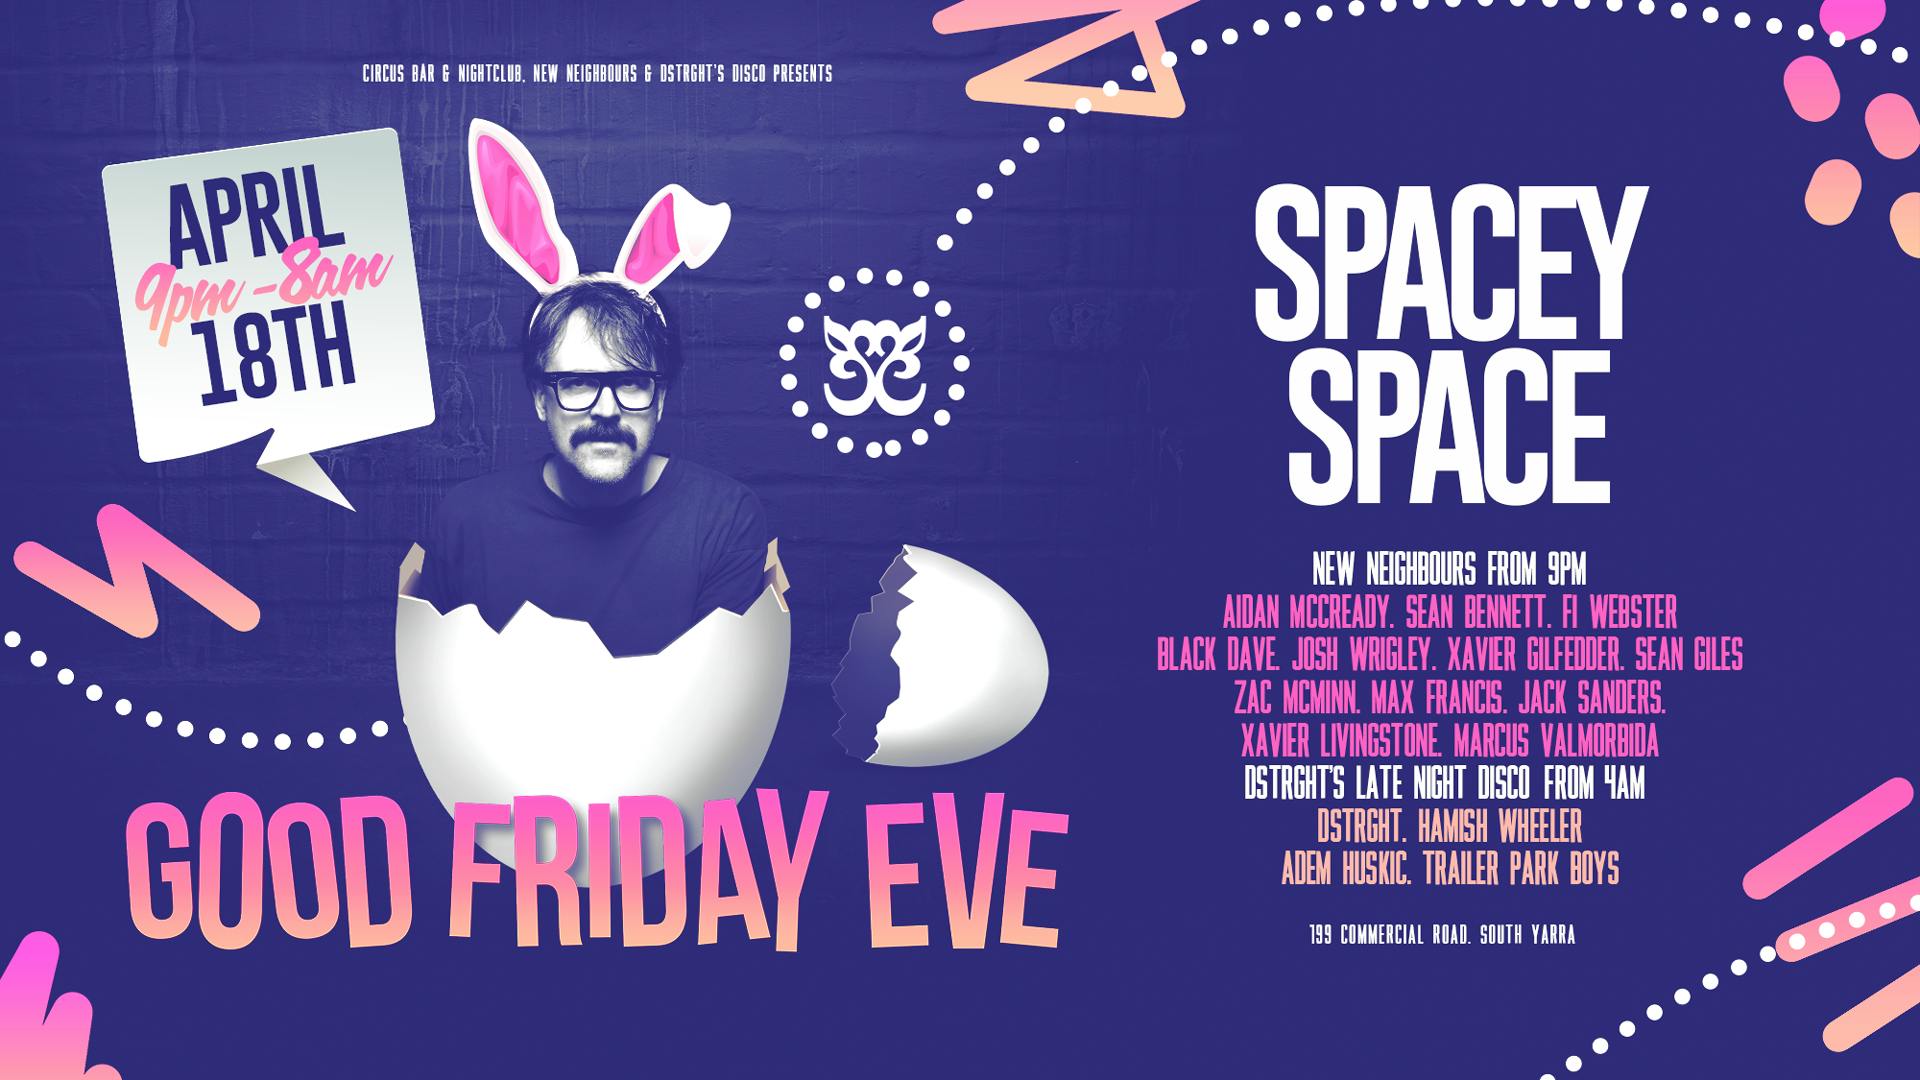 Circus Presents. Good Friday Eve Feat. Spacey Space